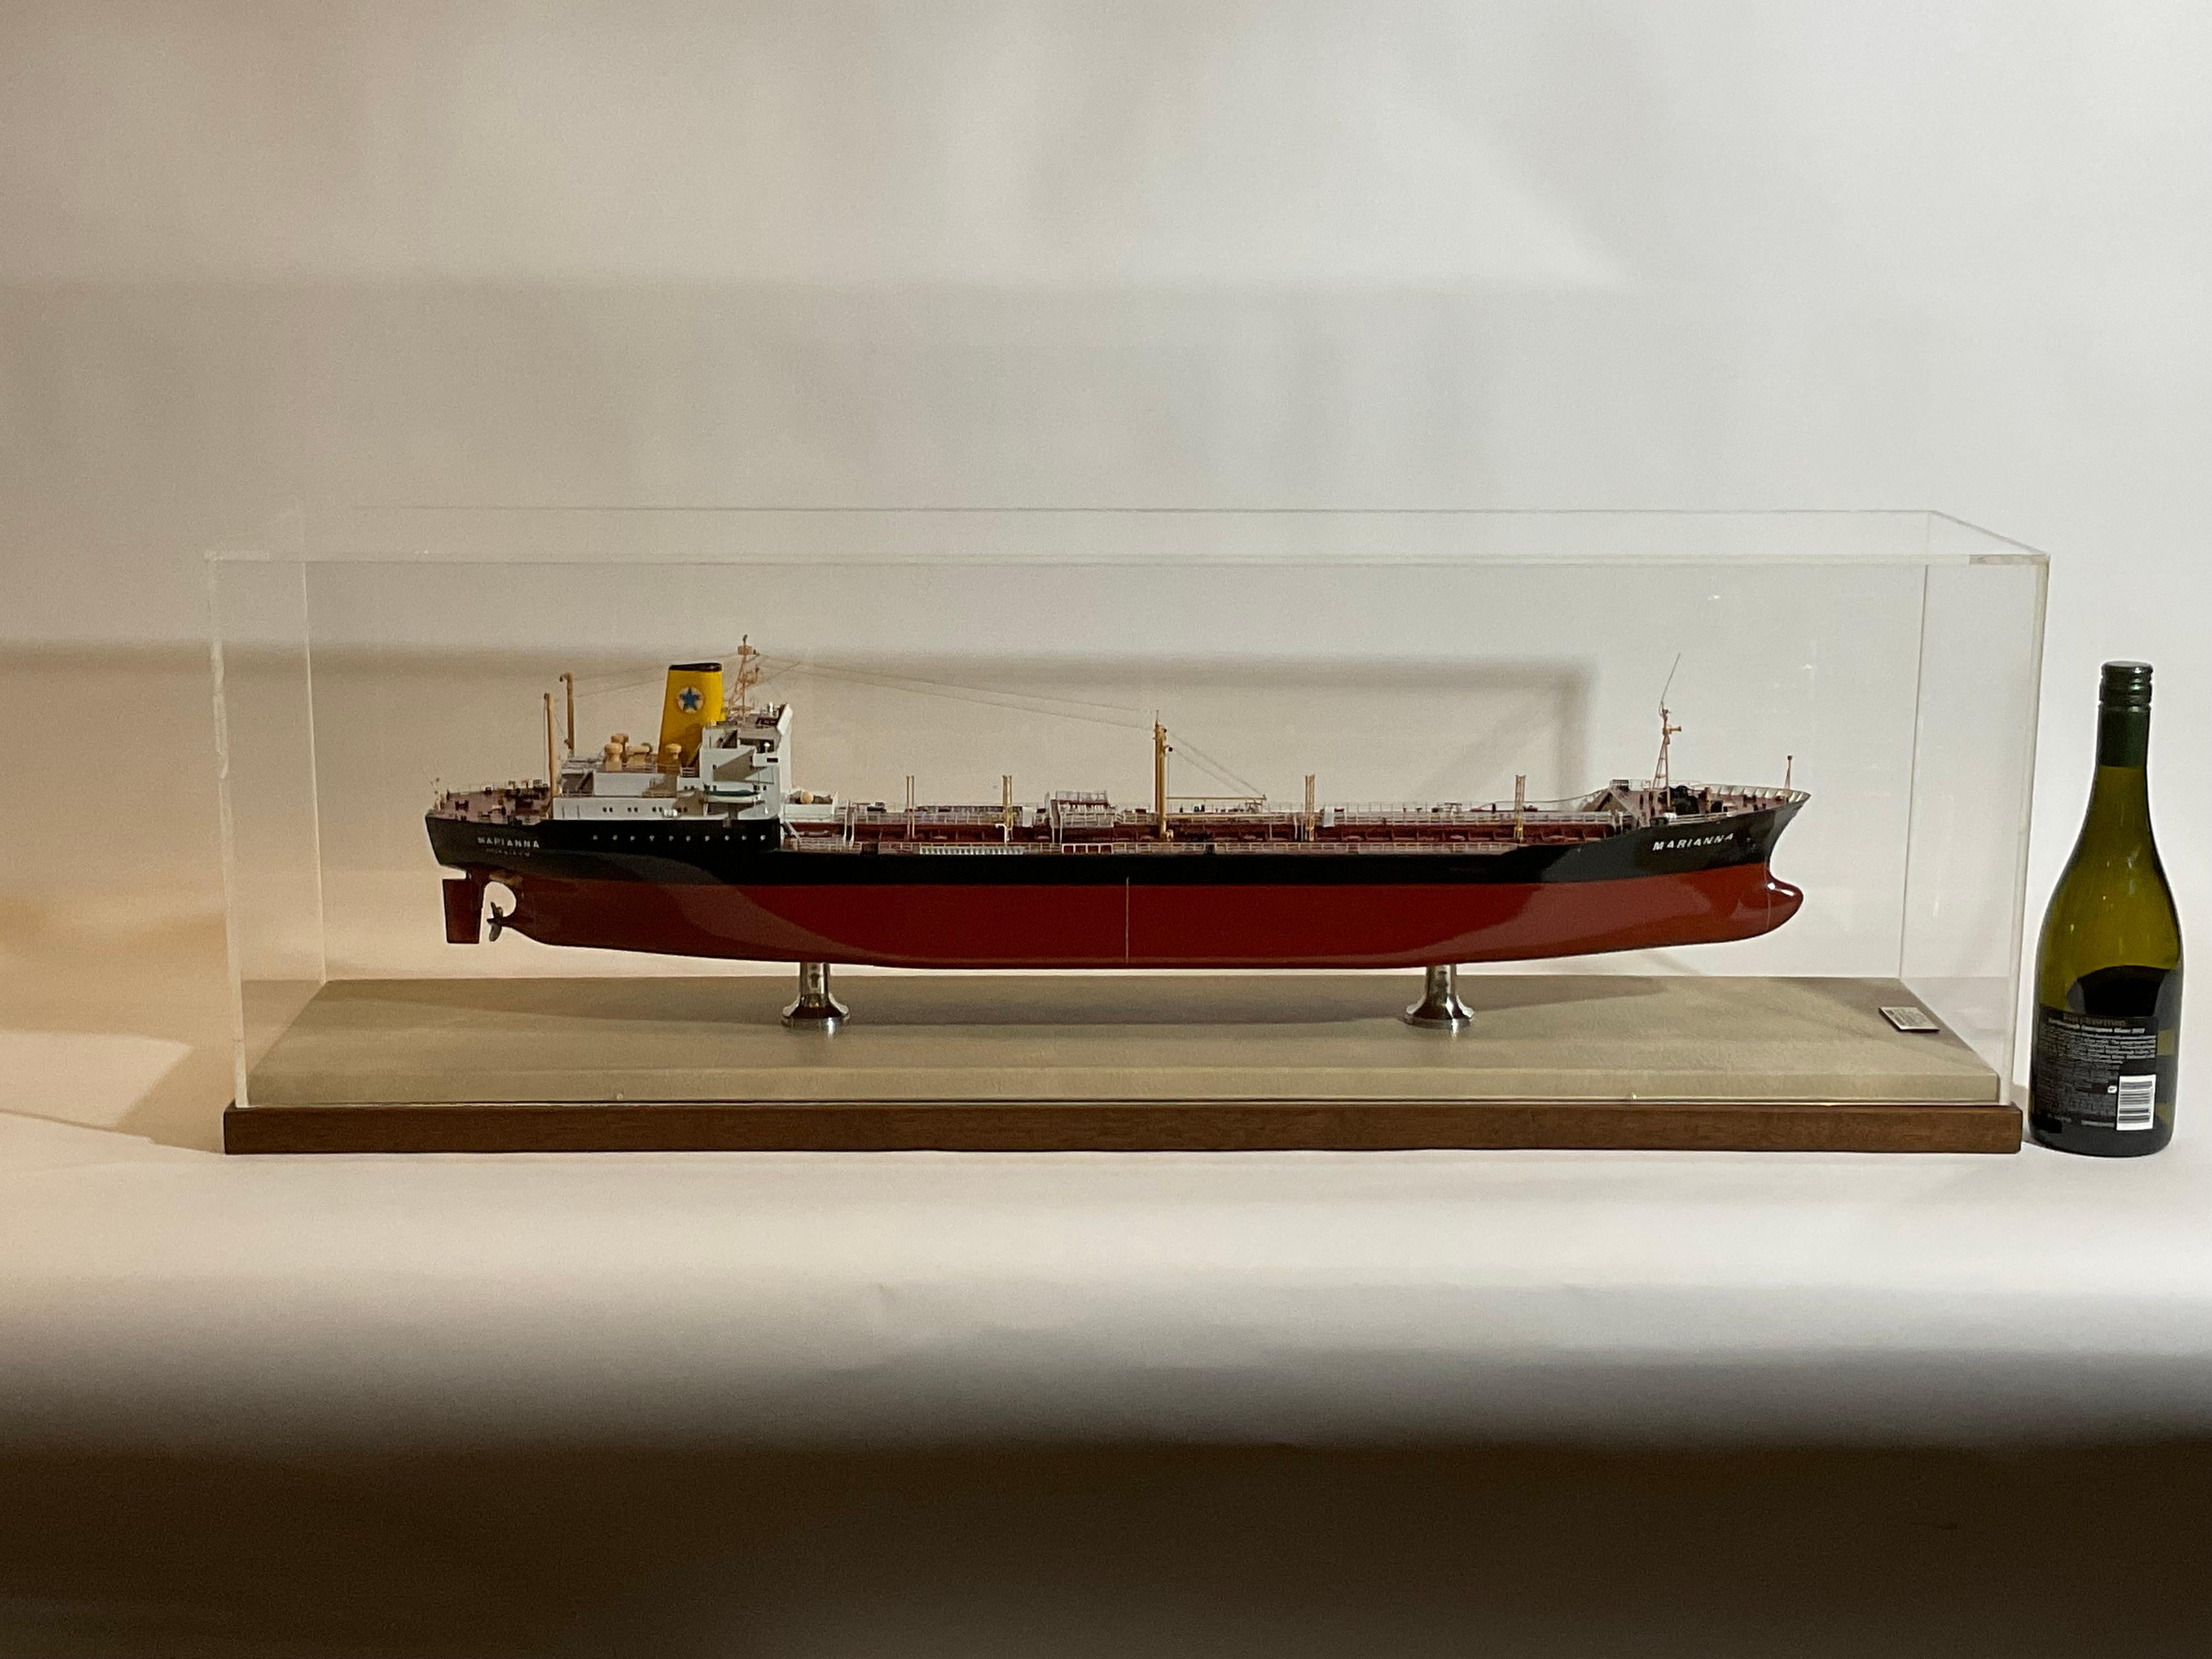 Finely built builders model of the crude oil tankers Marianna and Mapianna, the model representing the identical ships. Marianna was built by split shipyard in Croatia. She flew the Greek flag. The gross tonnage was 47,344 tons. Deadweight 84,141